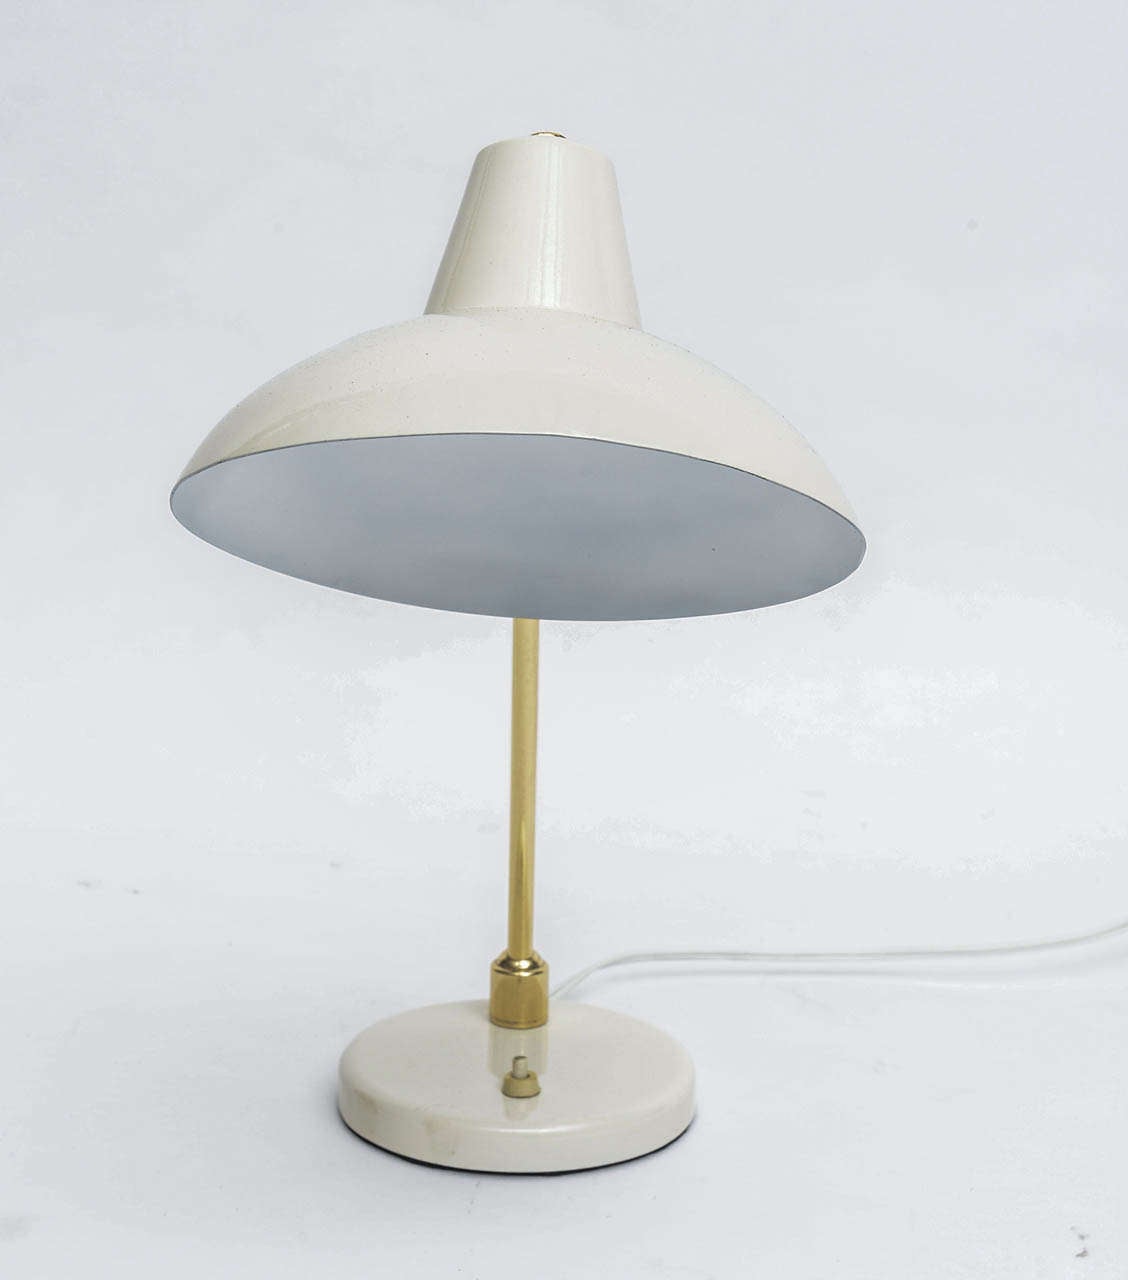 Articulated brass desk lamp with off-white enameled shade. Newly polished and re-wired.